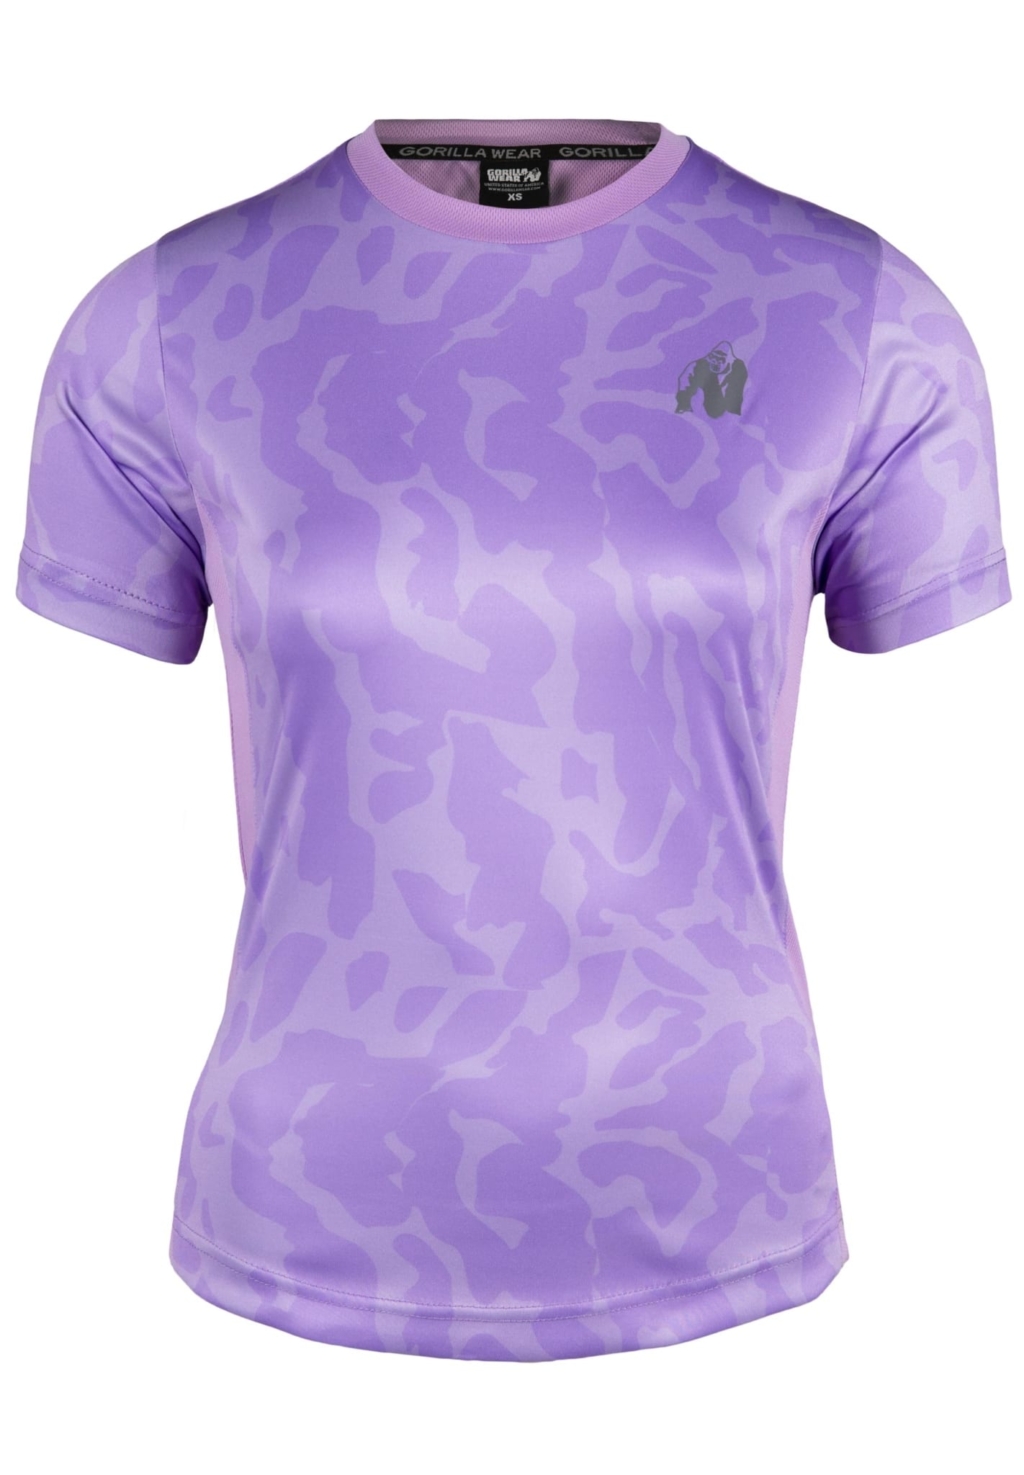 91542770 raleigh t shirt lilac 01 scaled